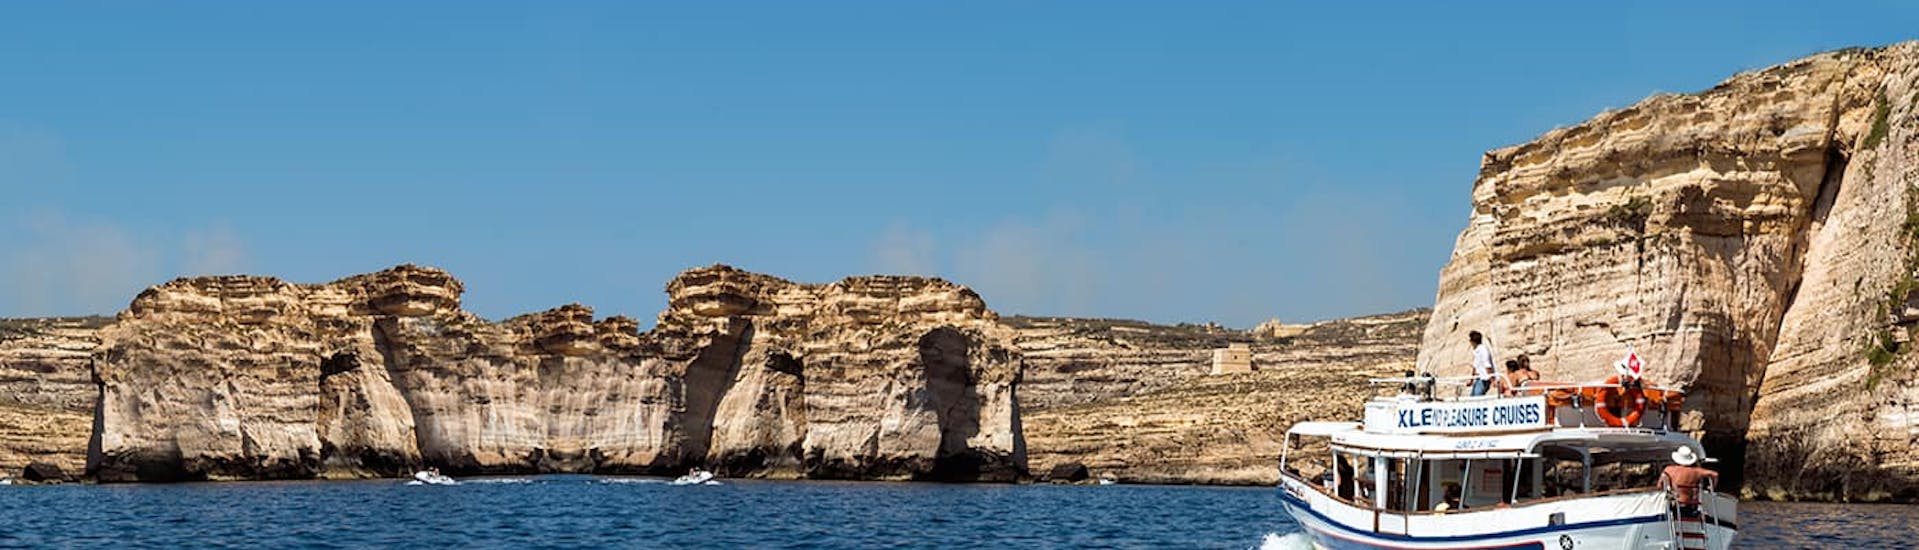 Boat of Xlendi Pleasure Cruises during the private boat trip from Mgarr around Comino and Gozo.